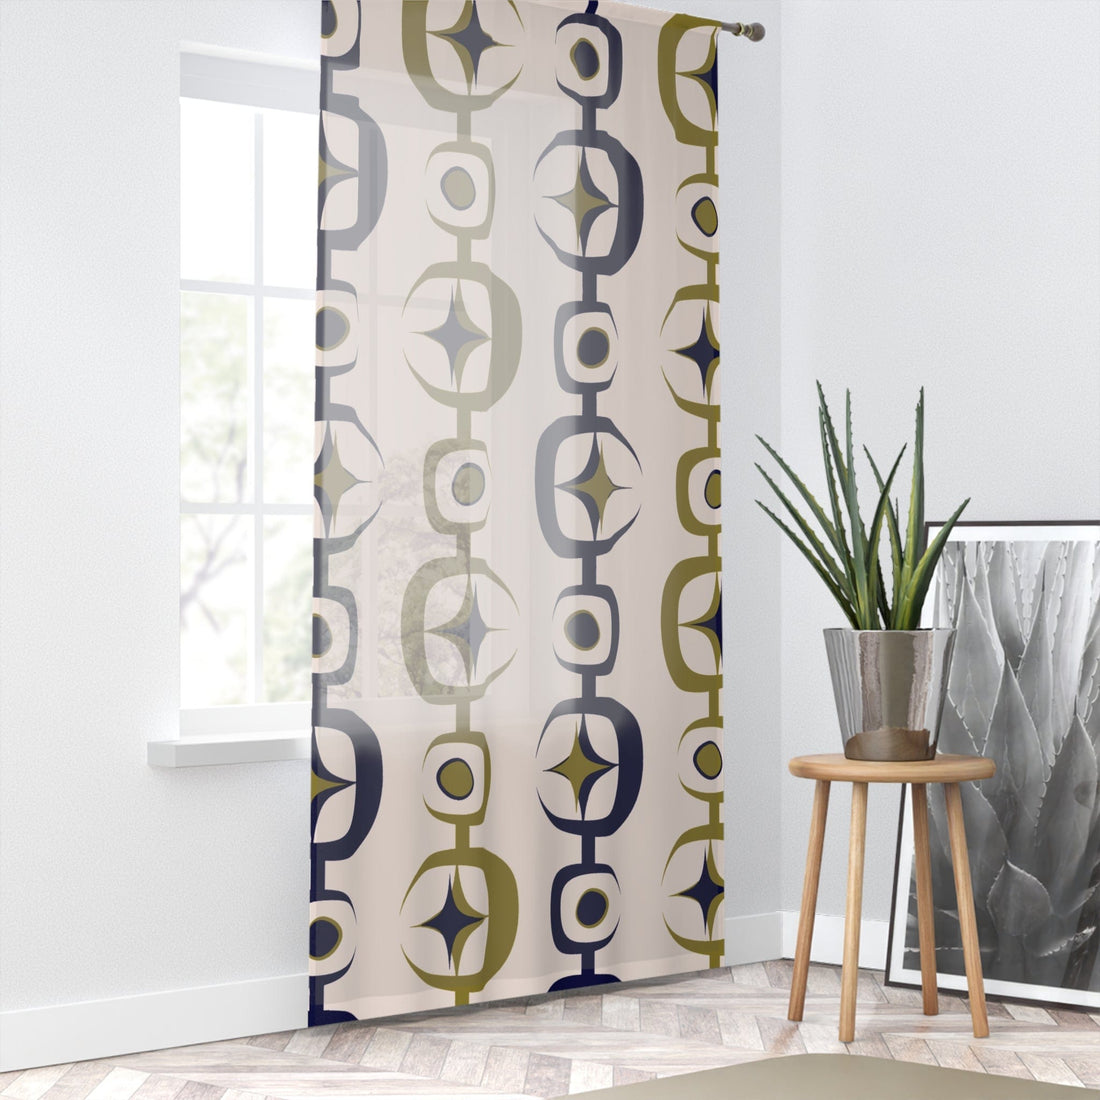 Kate McEnroe New York Mid Century Modern Atomic Age Window Curtains, Retro Starburst MCM Olive Navy Living Room Bedroom Sheer Curtain Panels Window Curtains Sheer / 50&quot; × 84&quot; 10283124561405550752